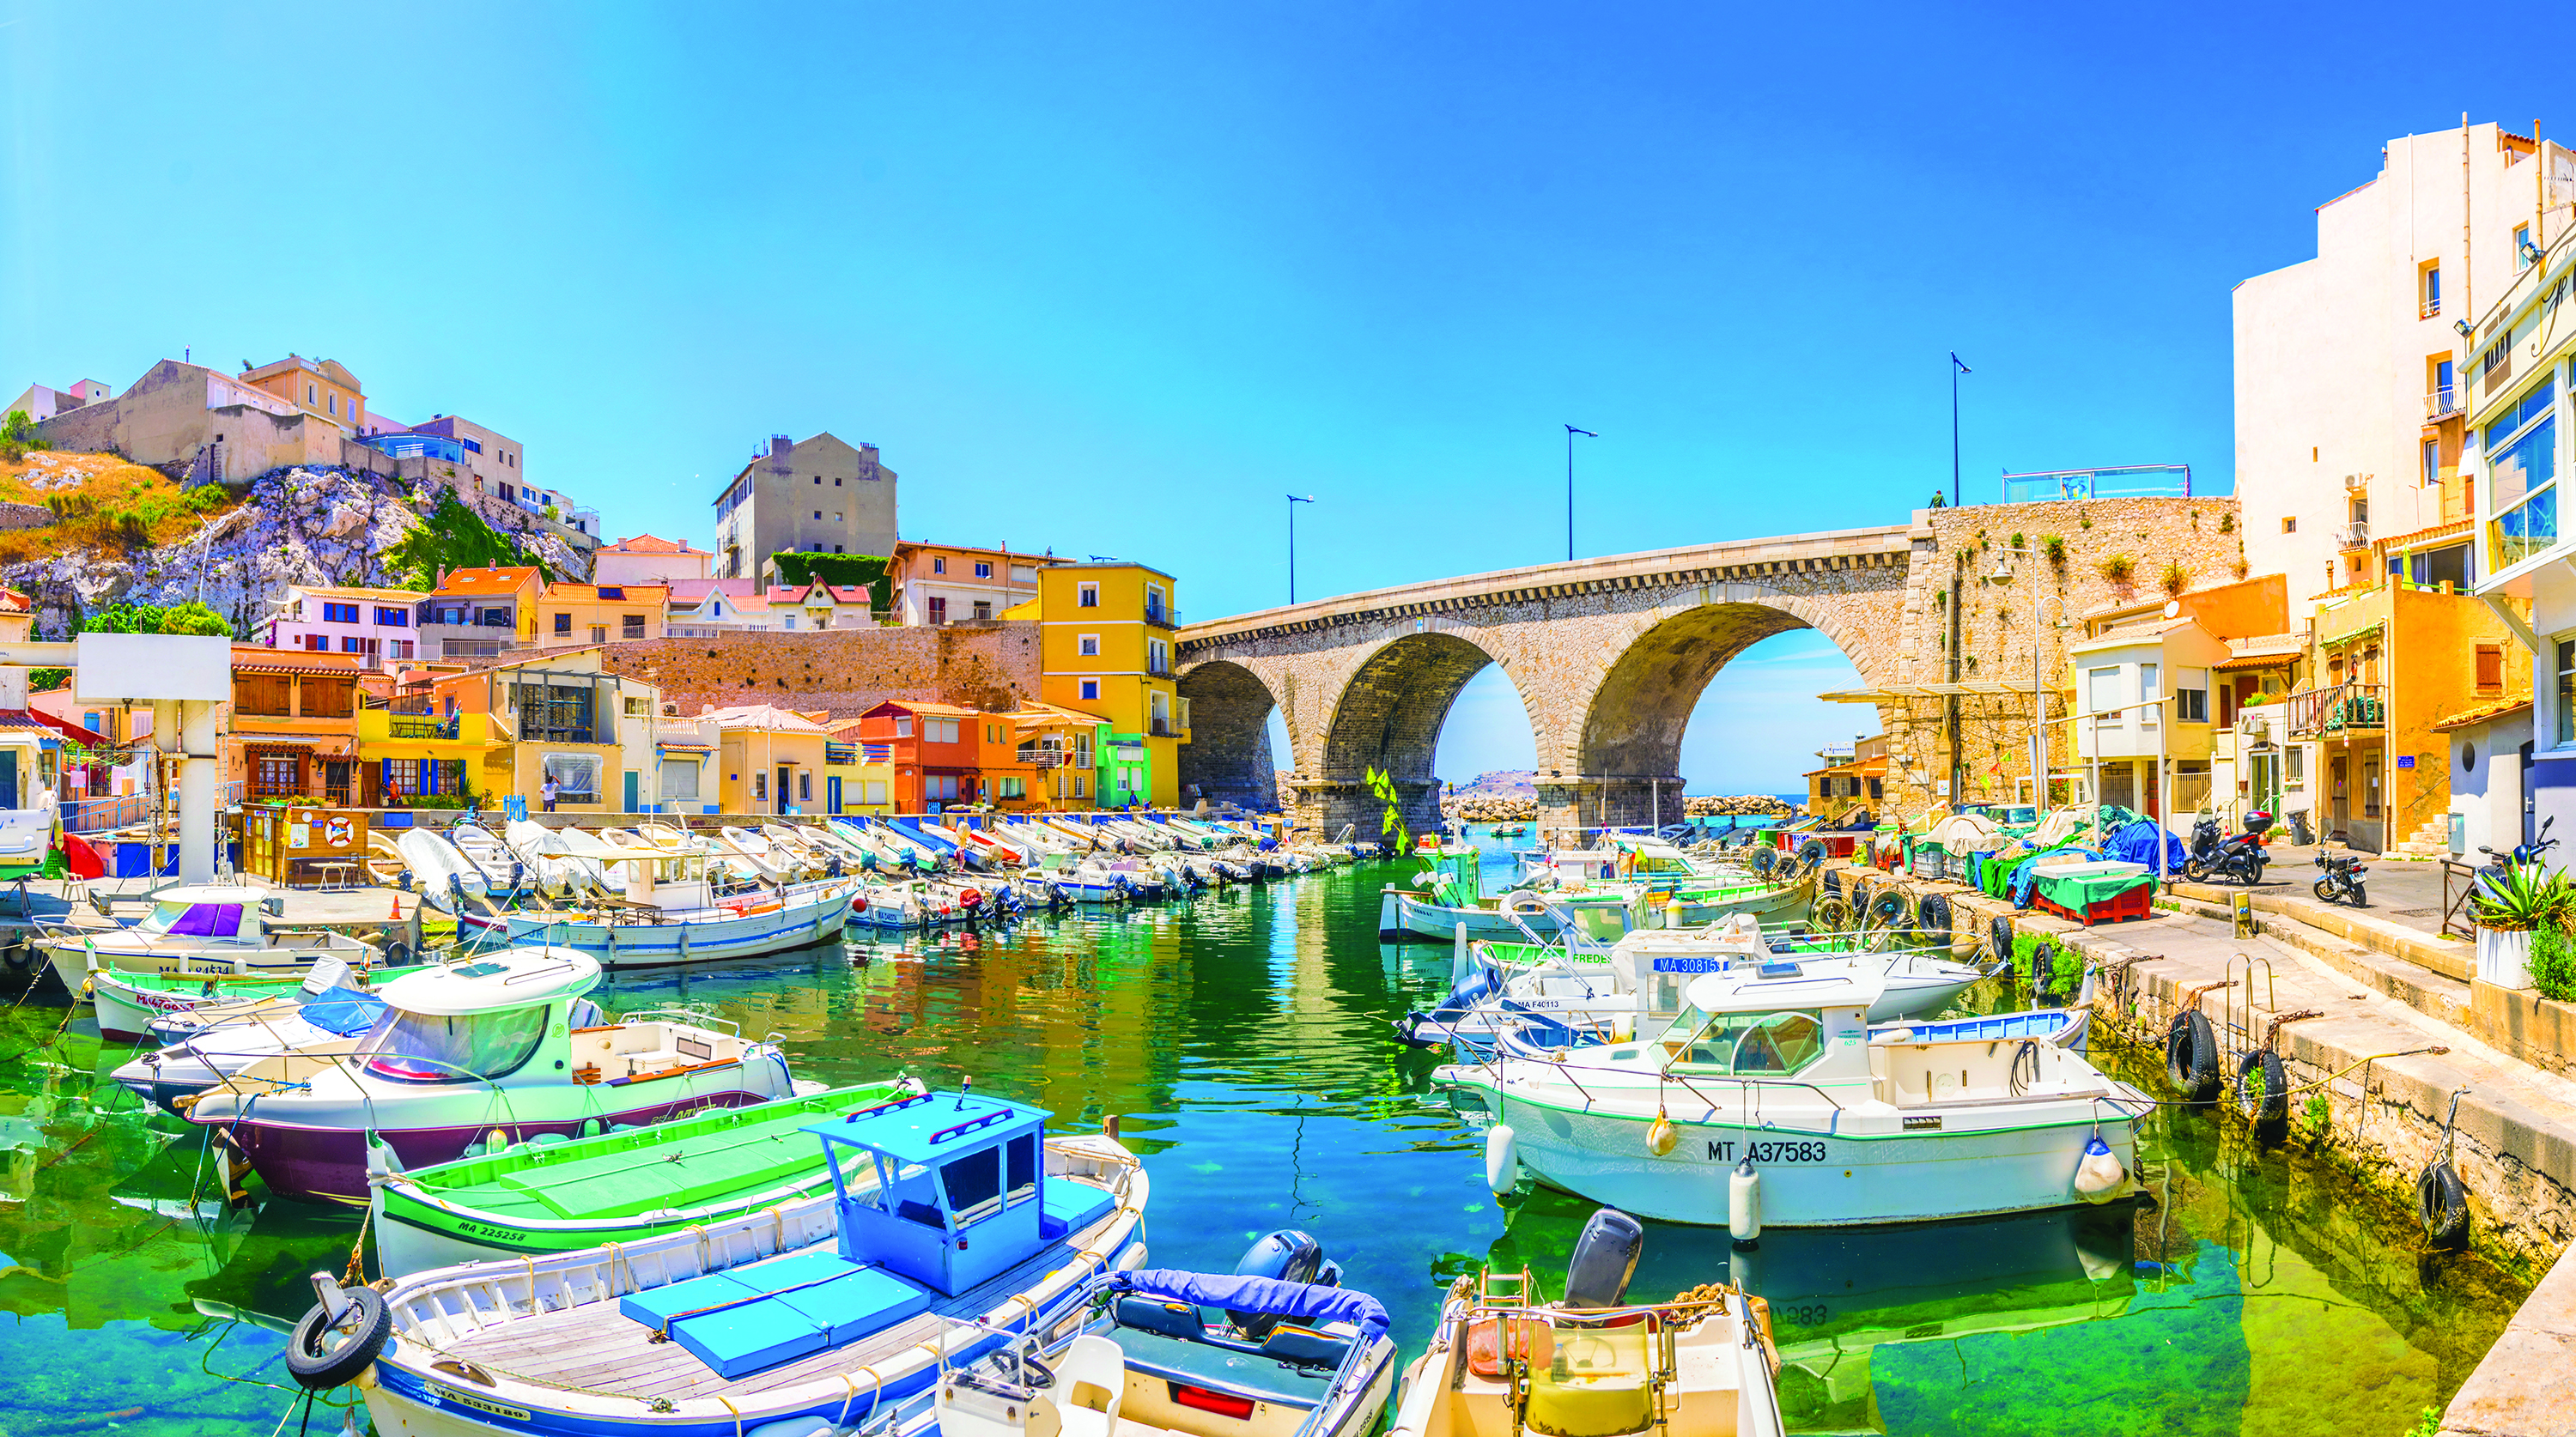 Photograph of colorful harbor in Marseille